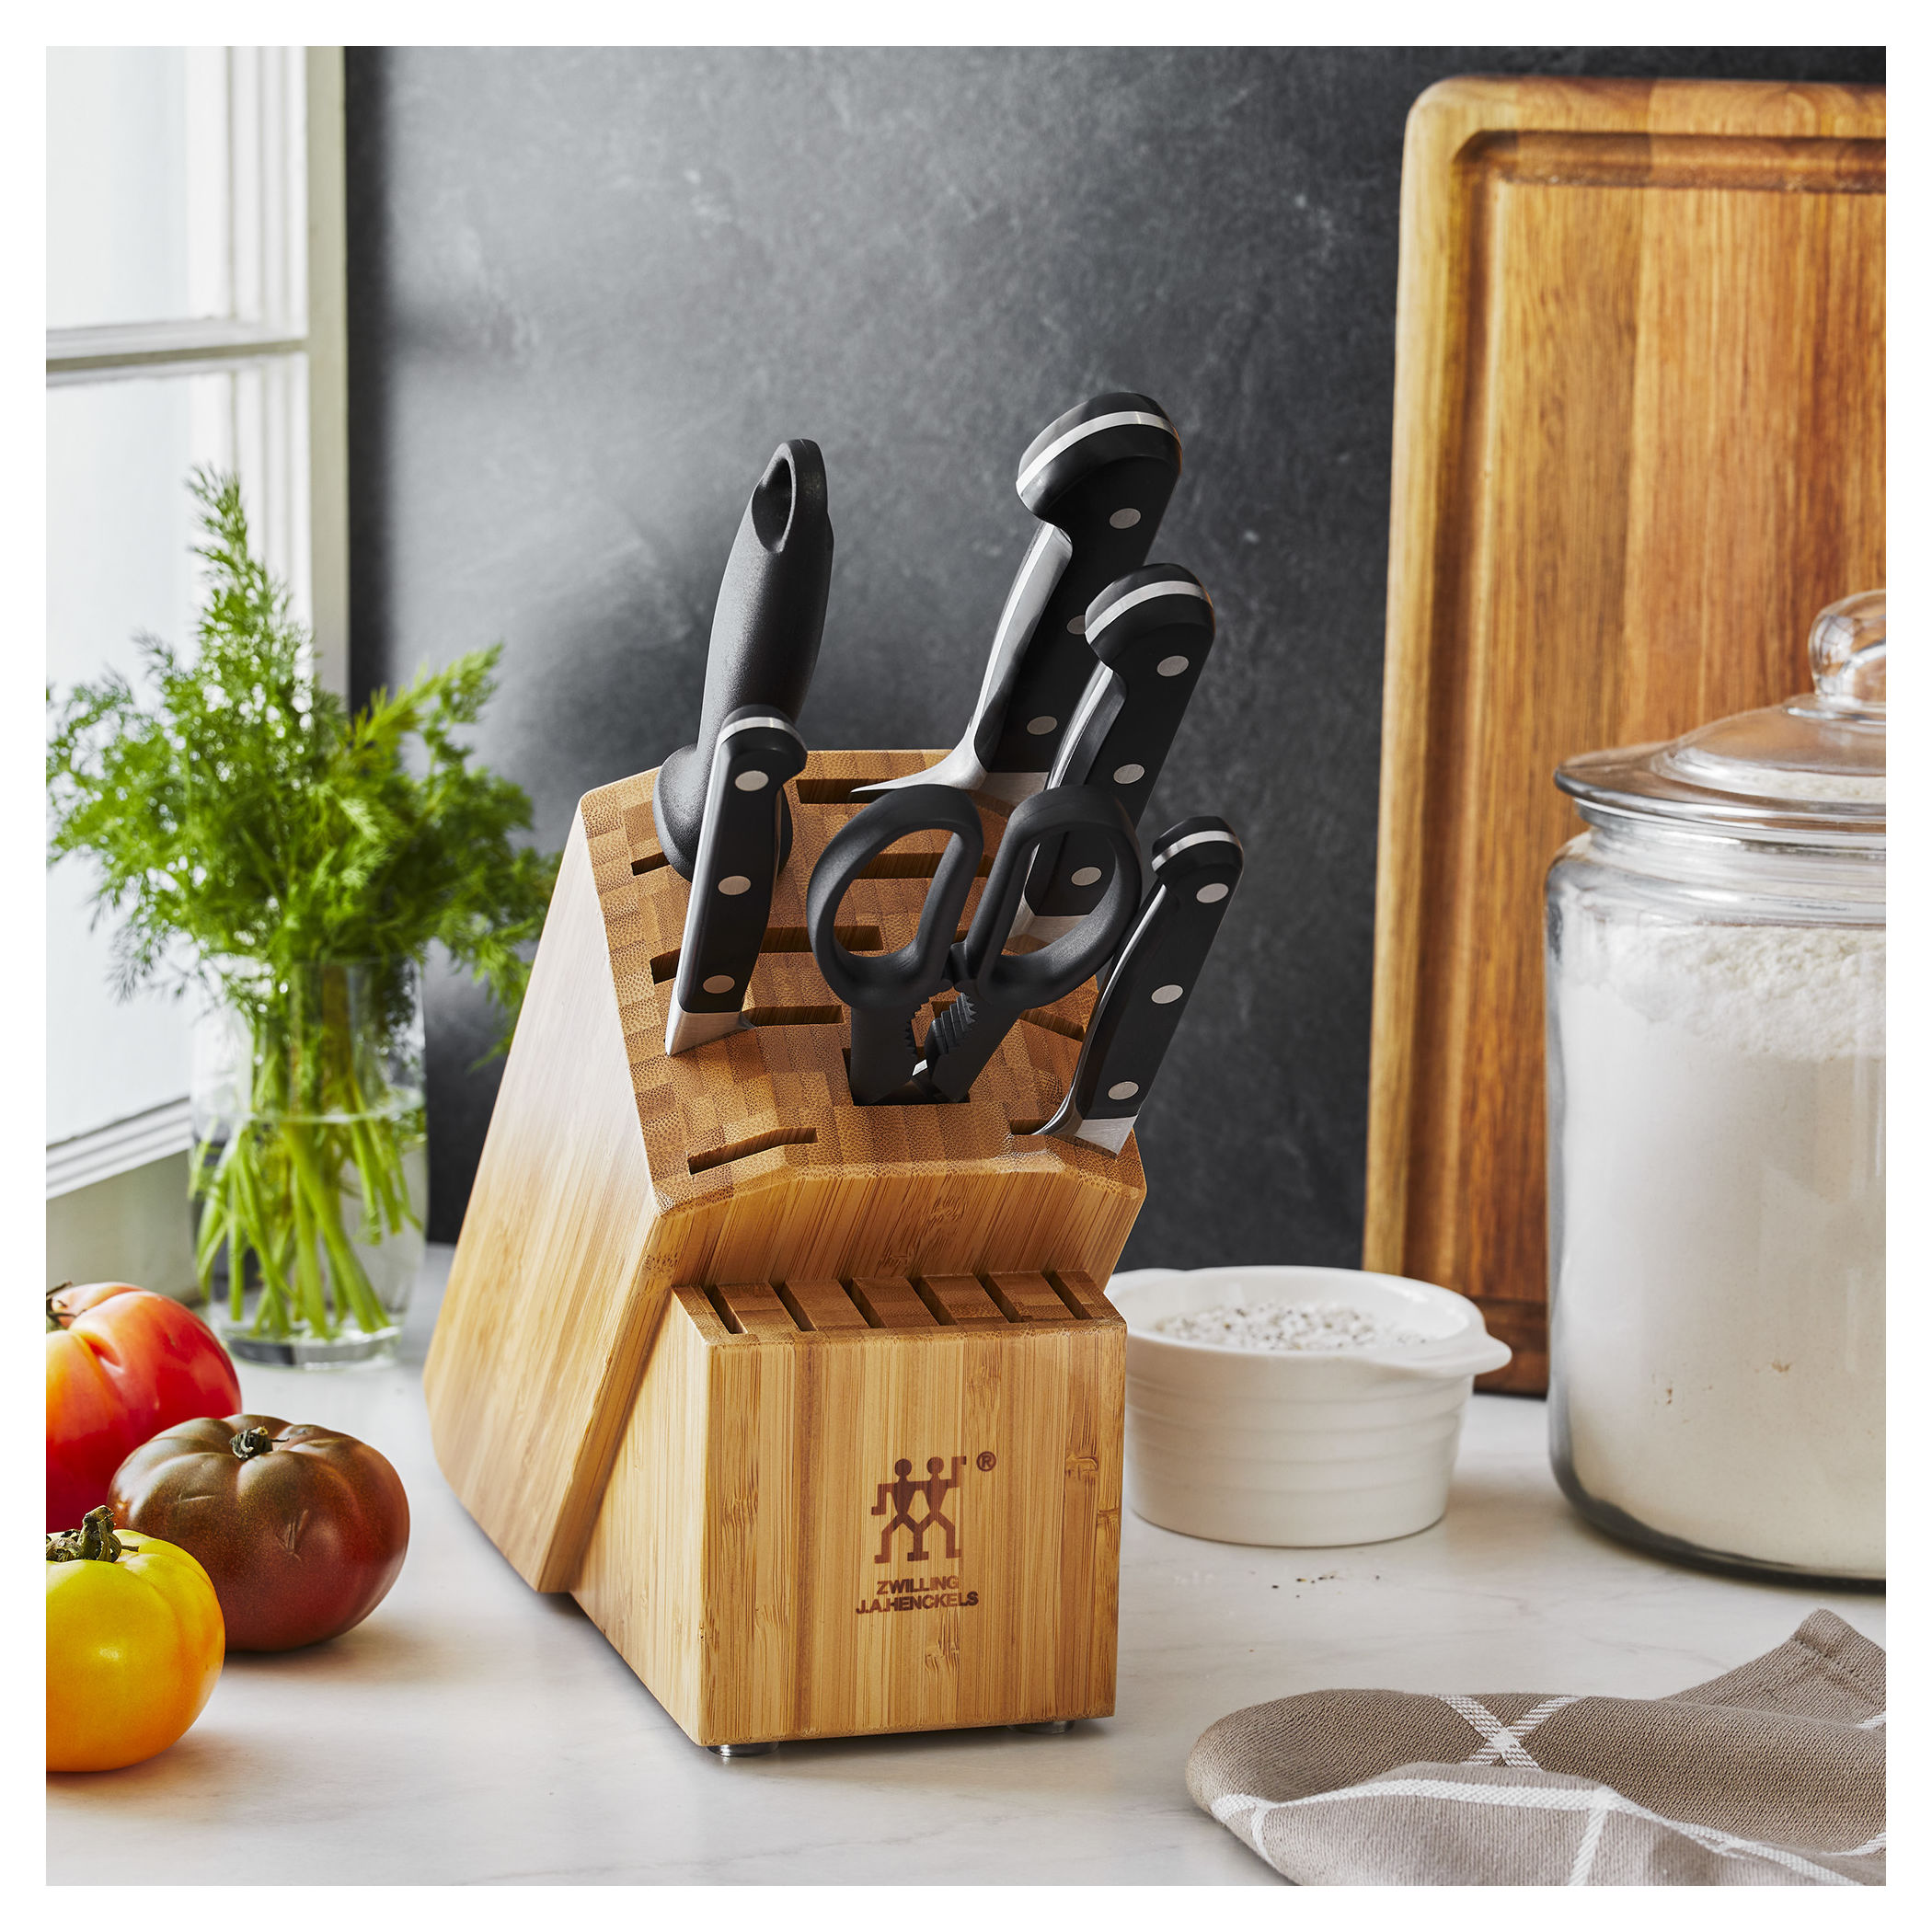 Zwilling ZWILLING J.A. Henckels Four Star 20-pc Knife Block Set - High  Carbon Stainless Steel Blades, Dishwasher Safe, Bamboo Block, Made in  Germany